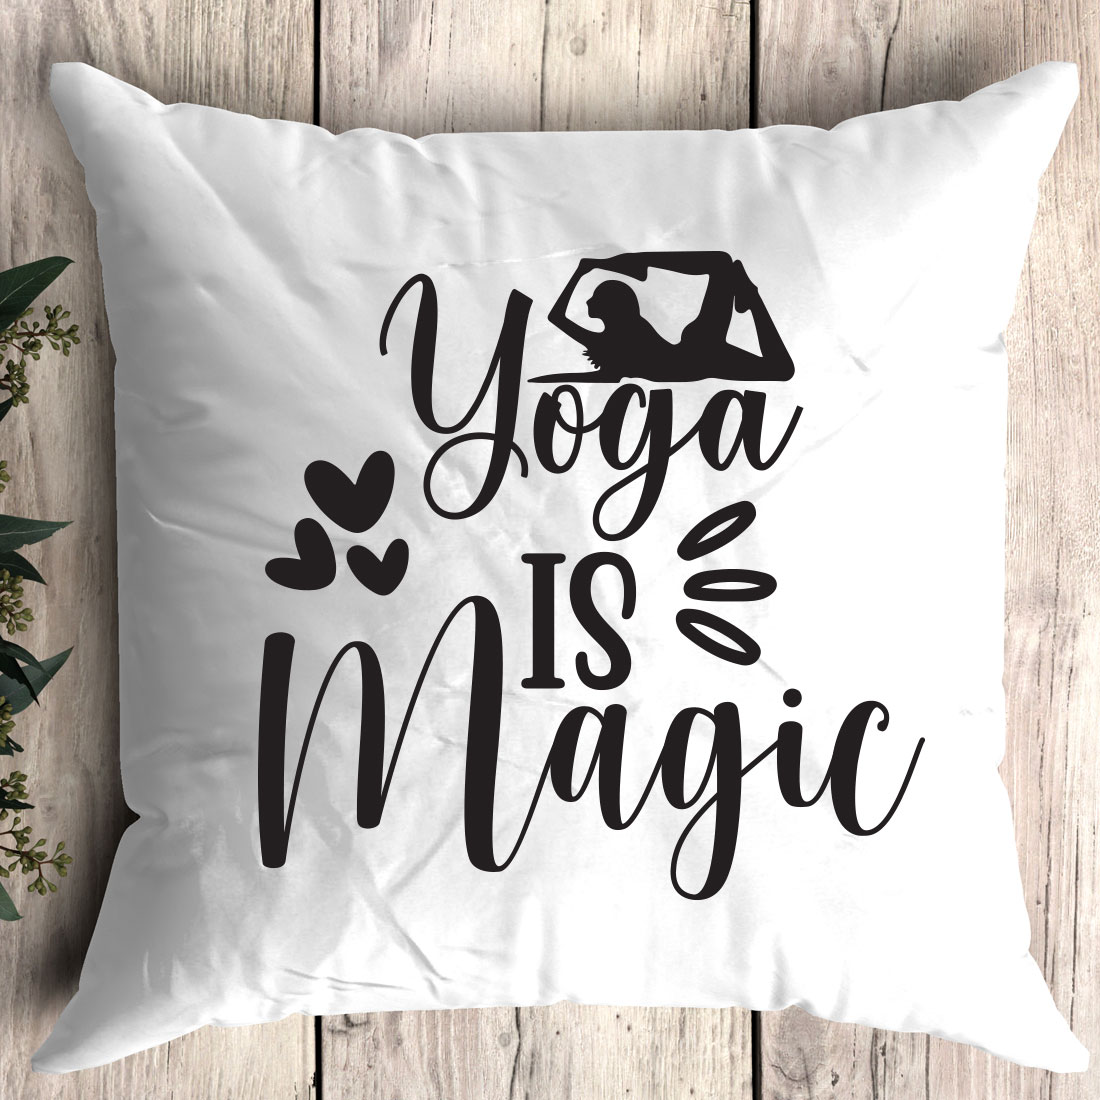 Pillow that says yoga is magic.